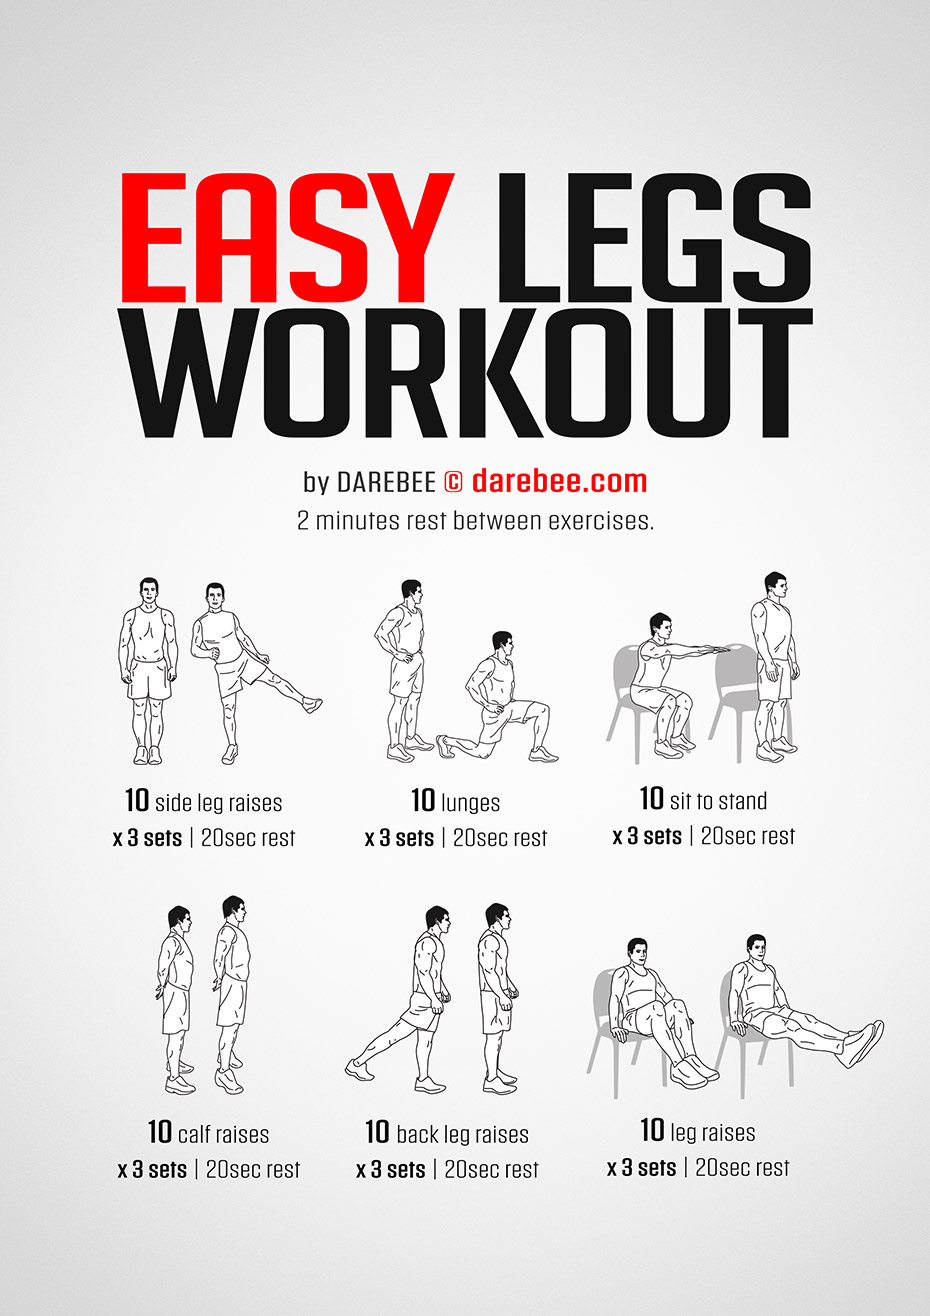 exercise for legs